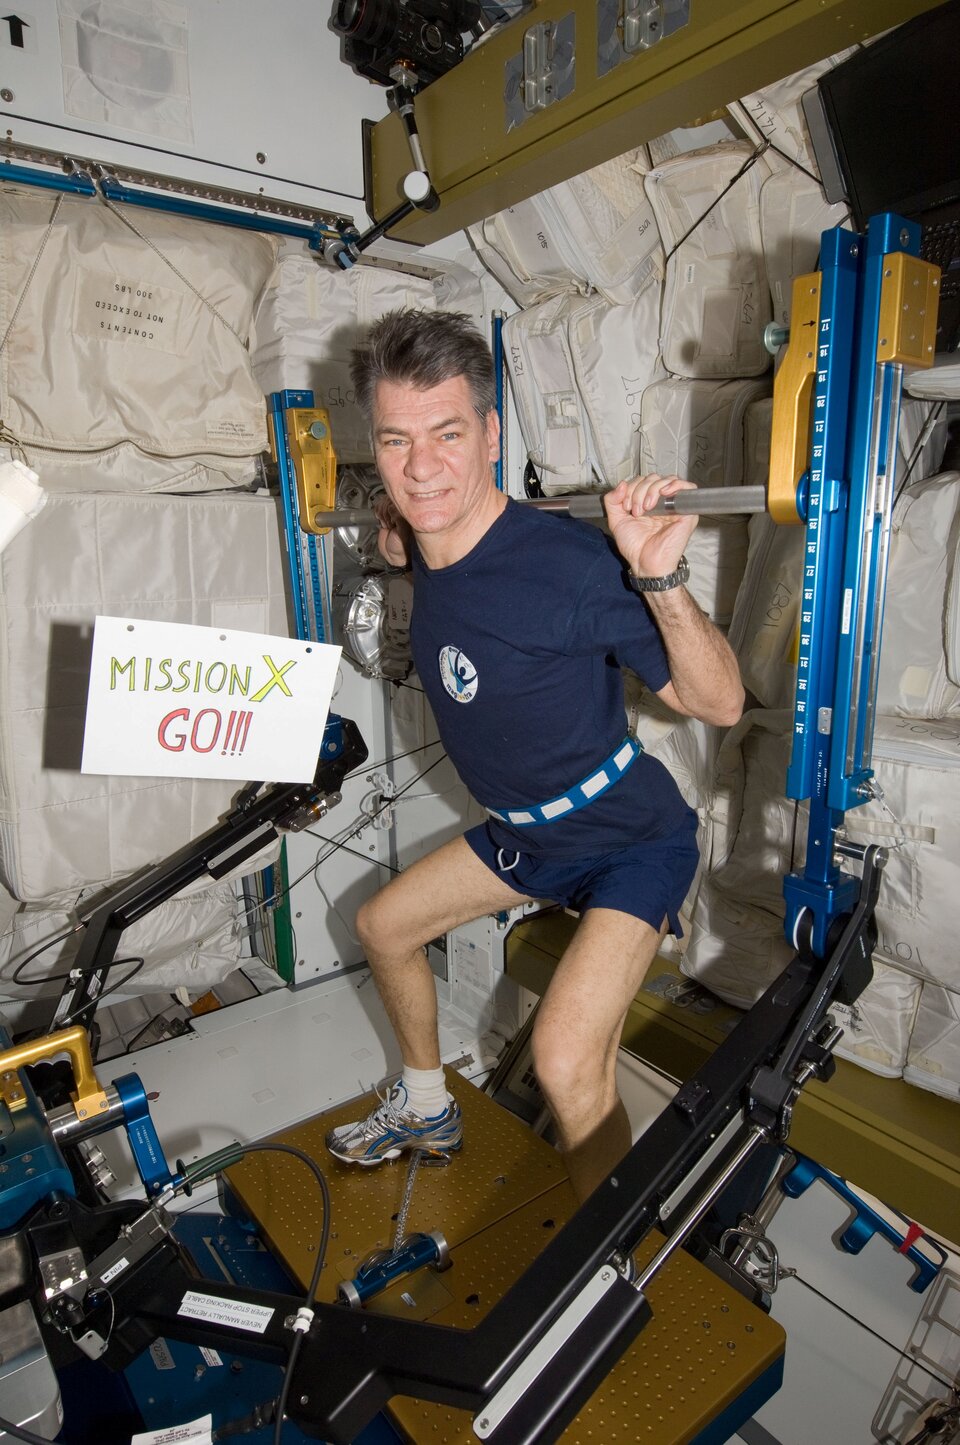 Astronaut Paolo in space